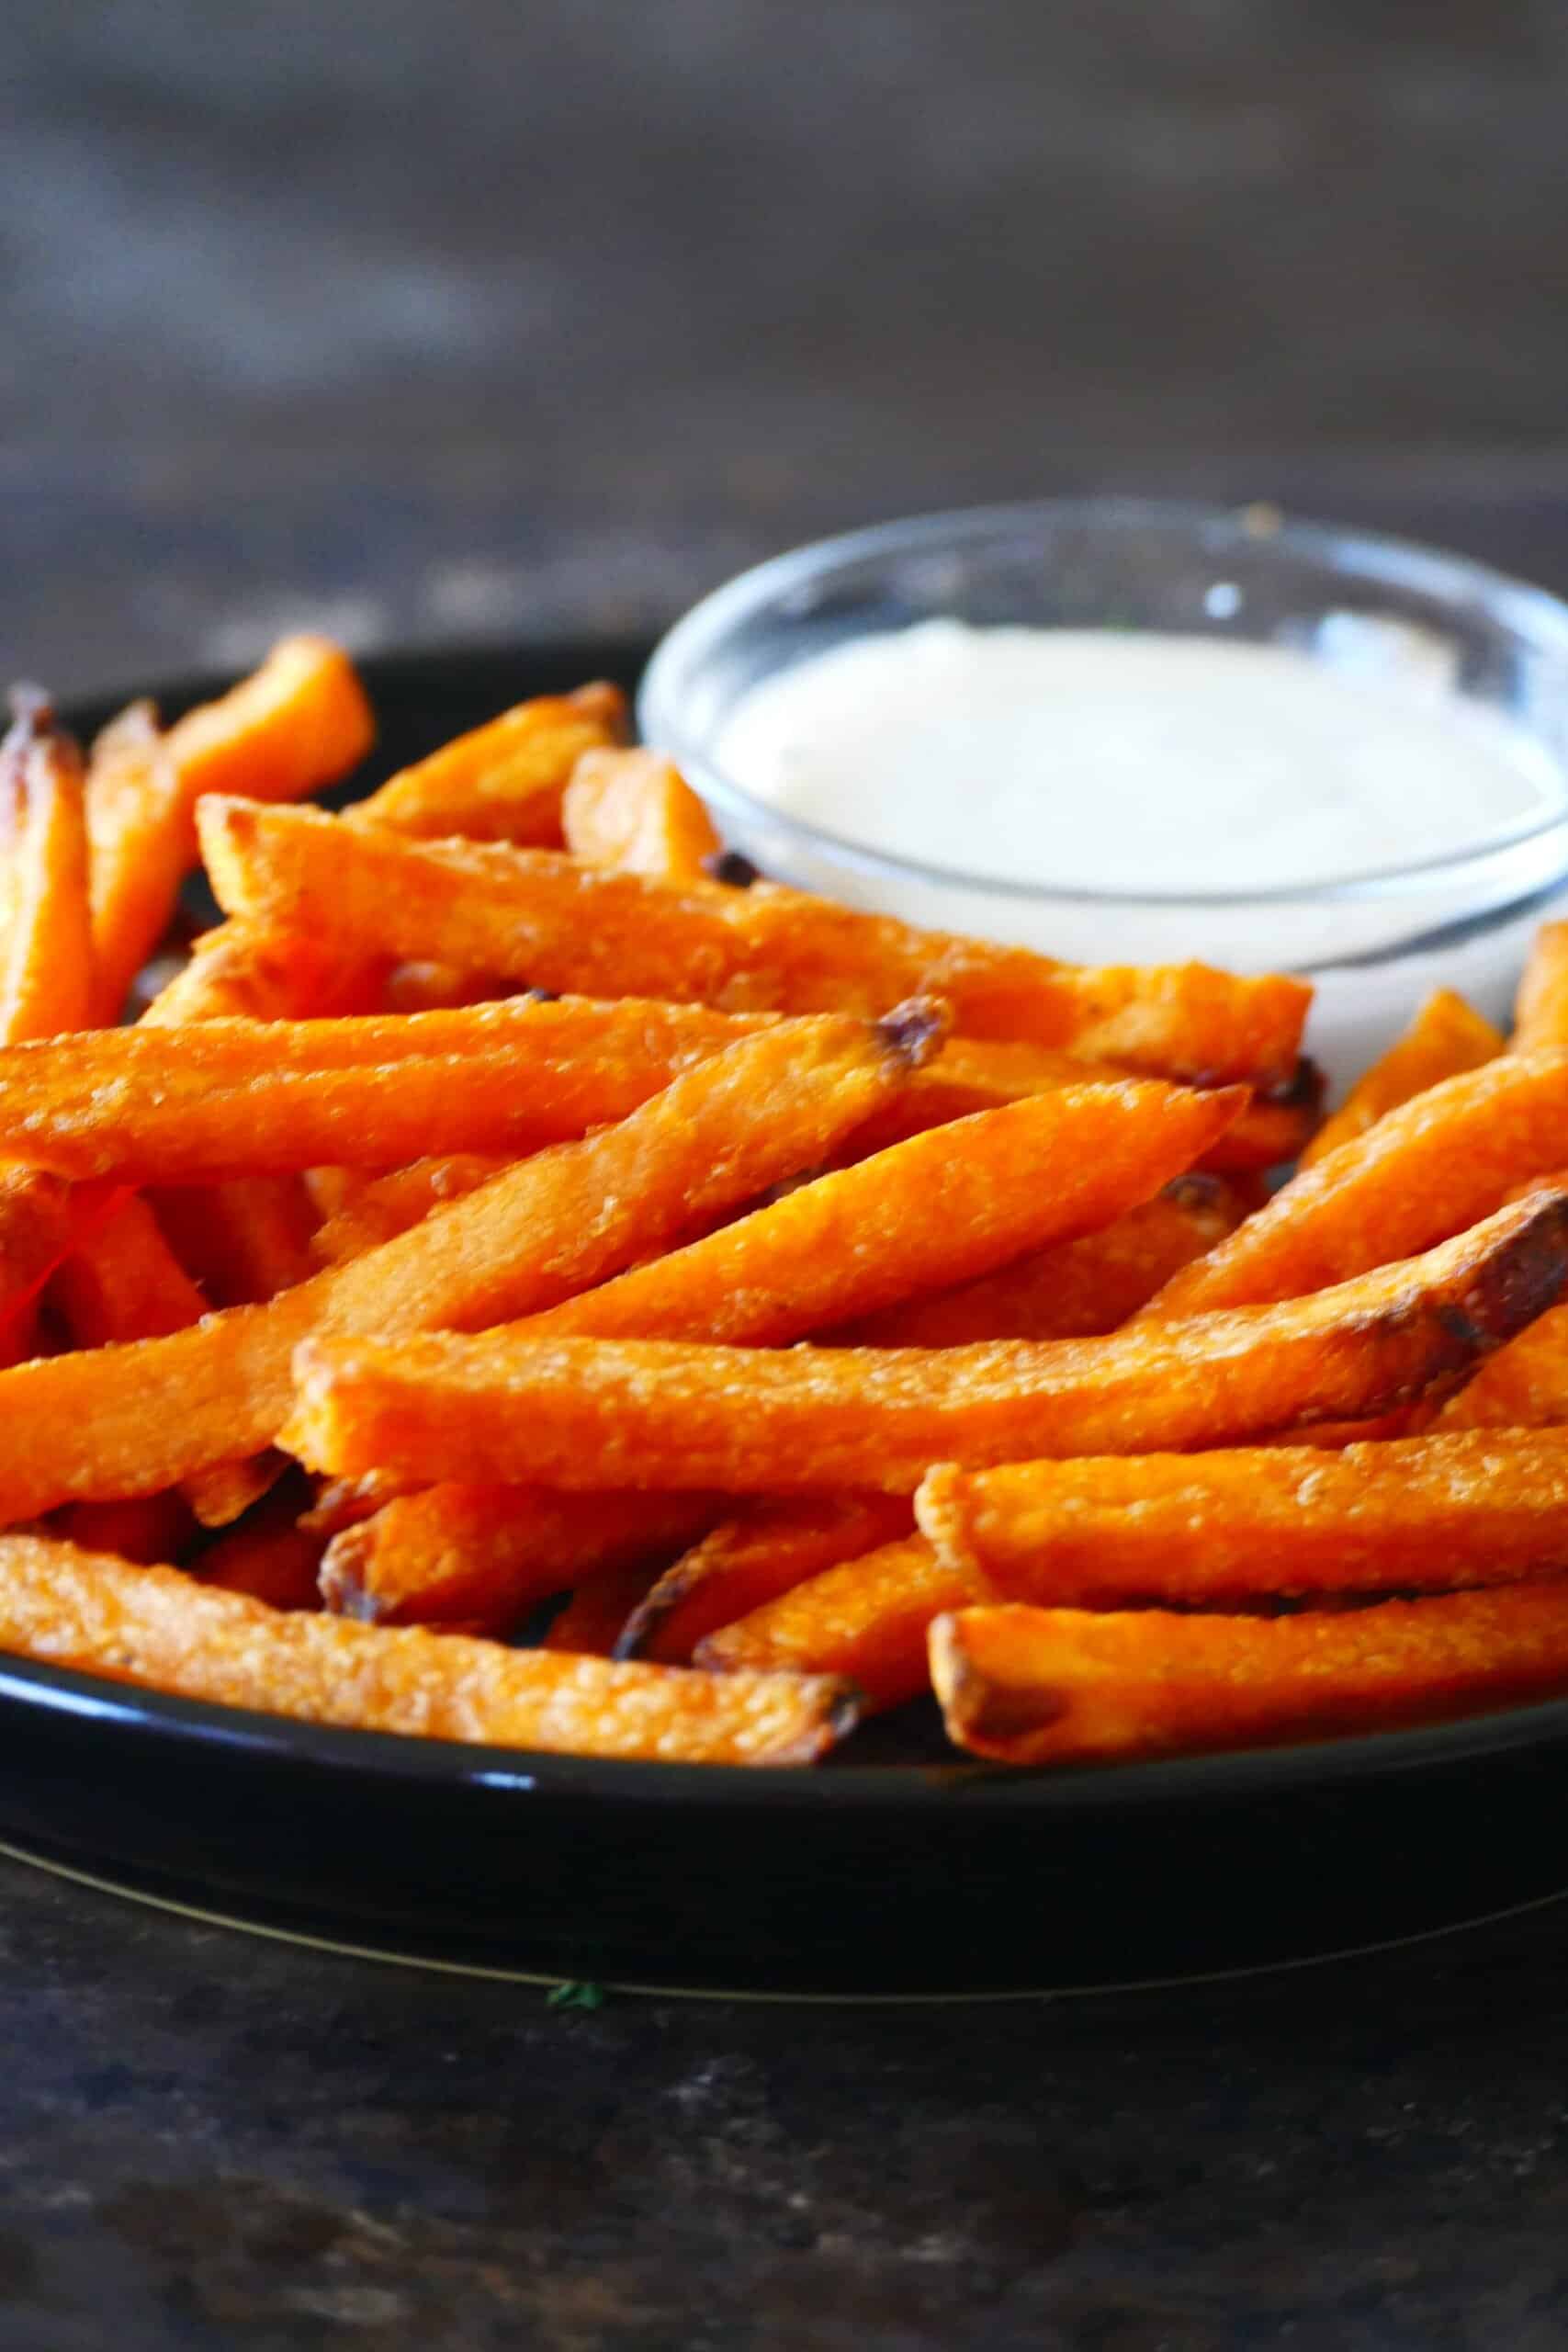 Frozen sweet potato fries in air fryer - Black plate with sweet potato fries and bowl of white sauce